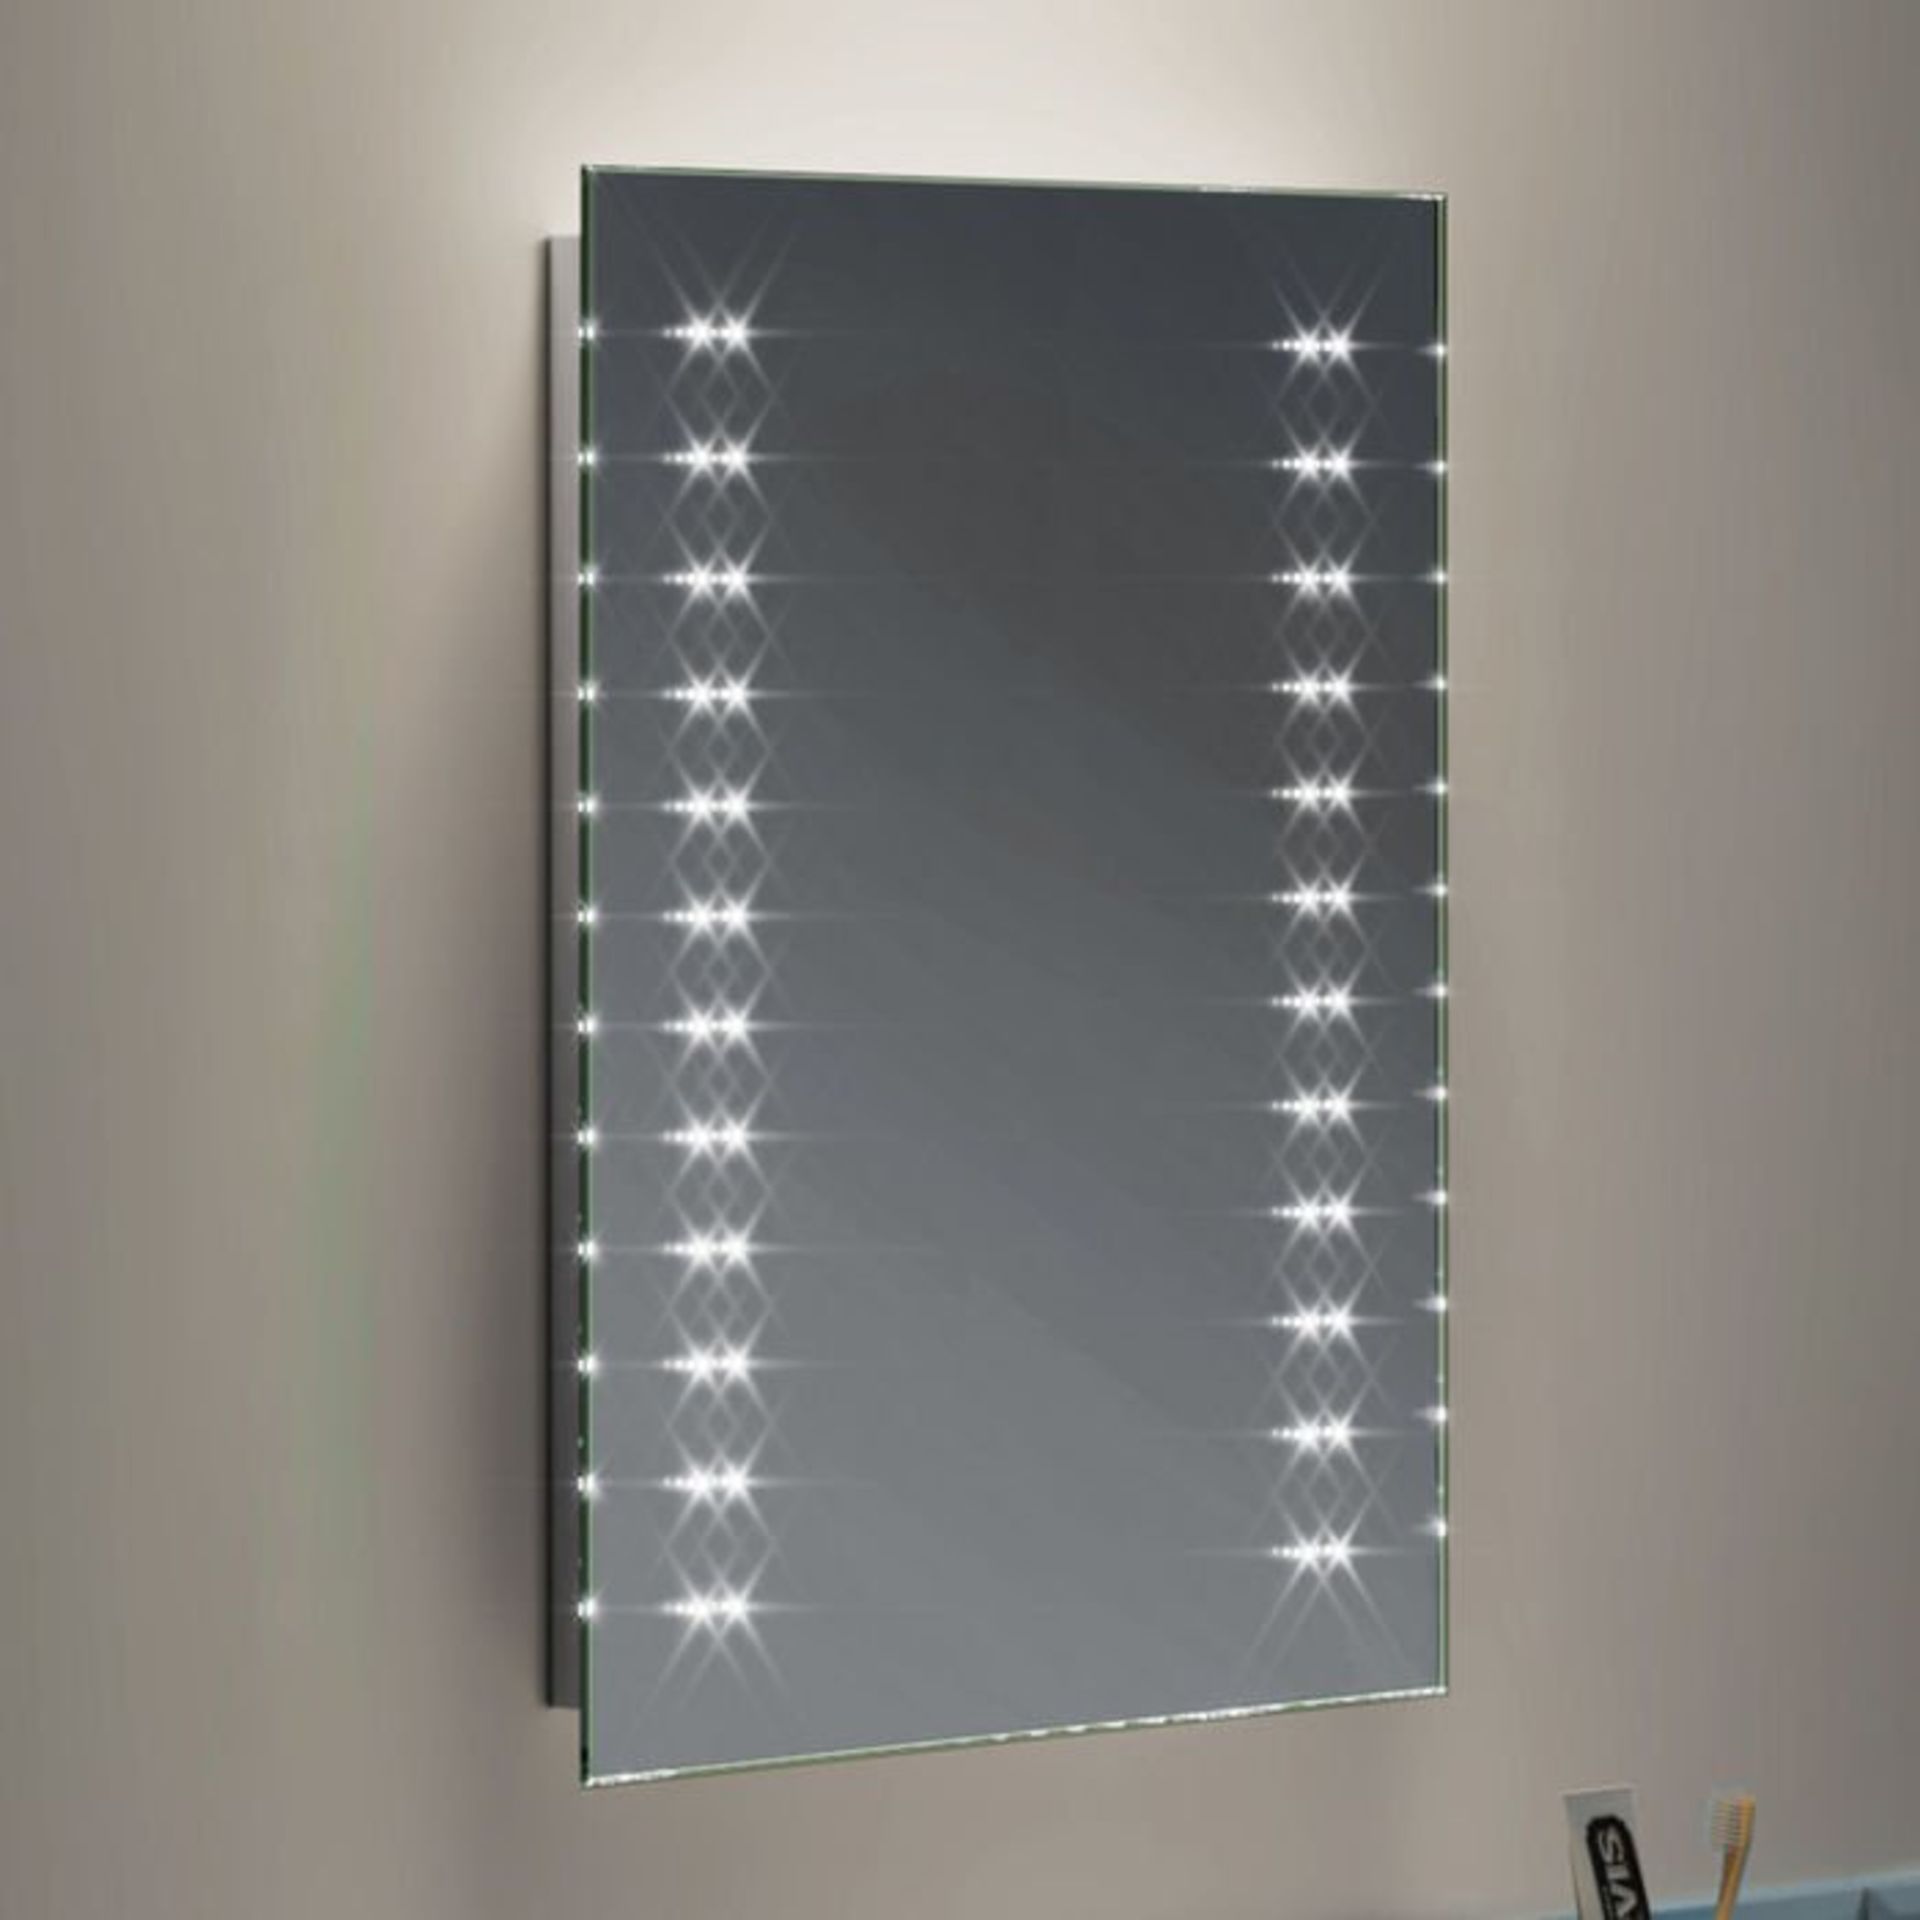 (Y30) 390x500mm Galactic LED Mirror - Battery Operated. Energy saving controlled On / Off switch - Image 2 of 2